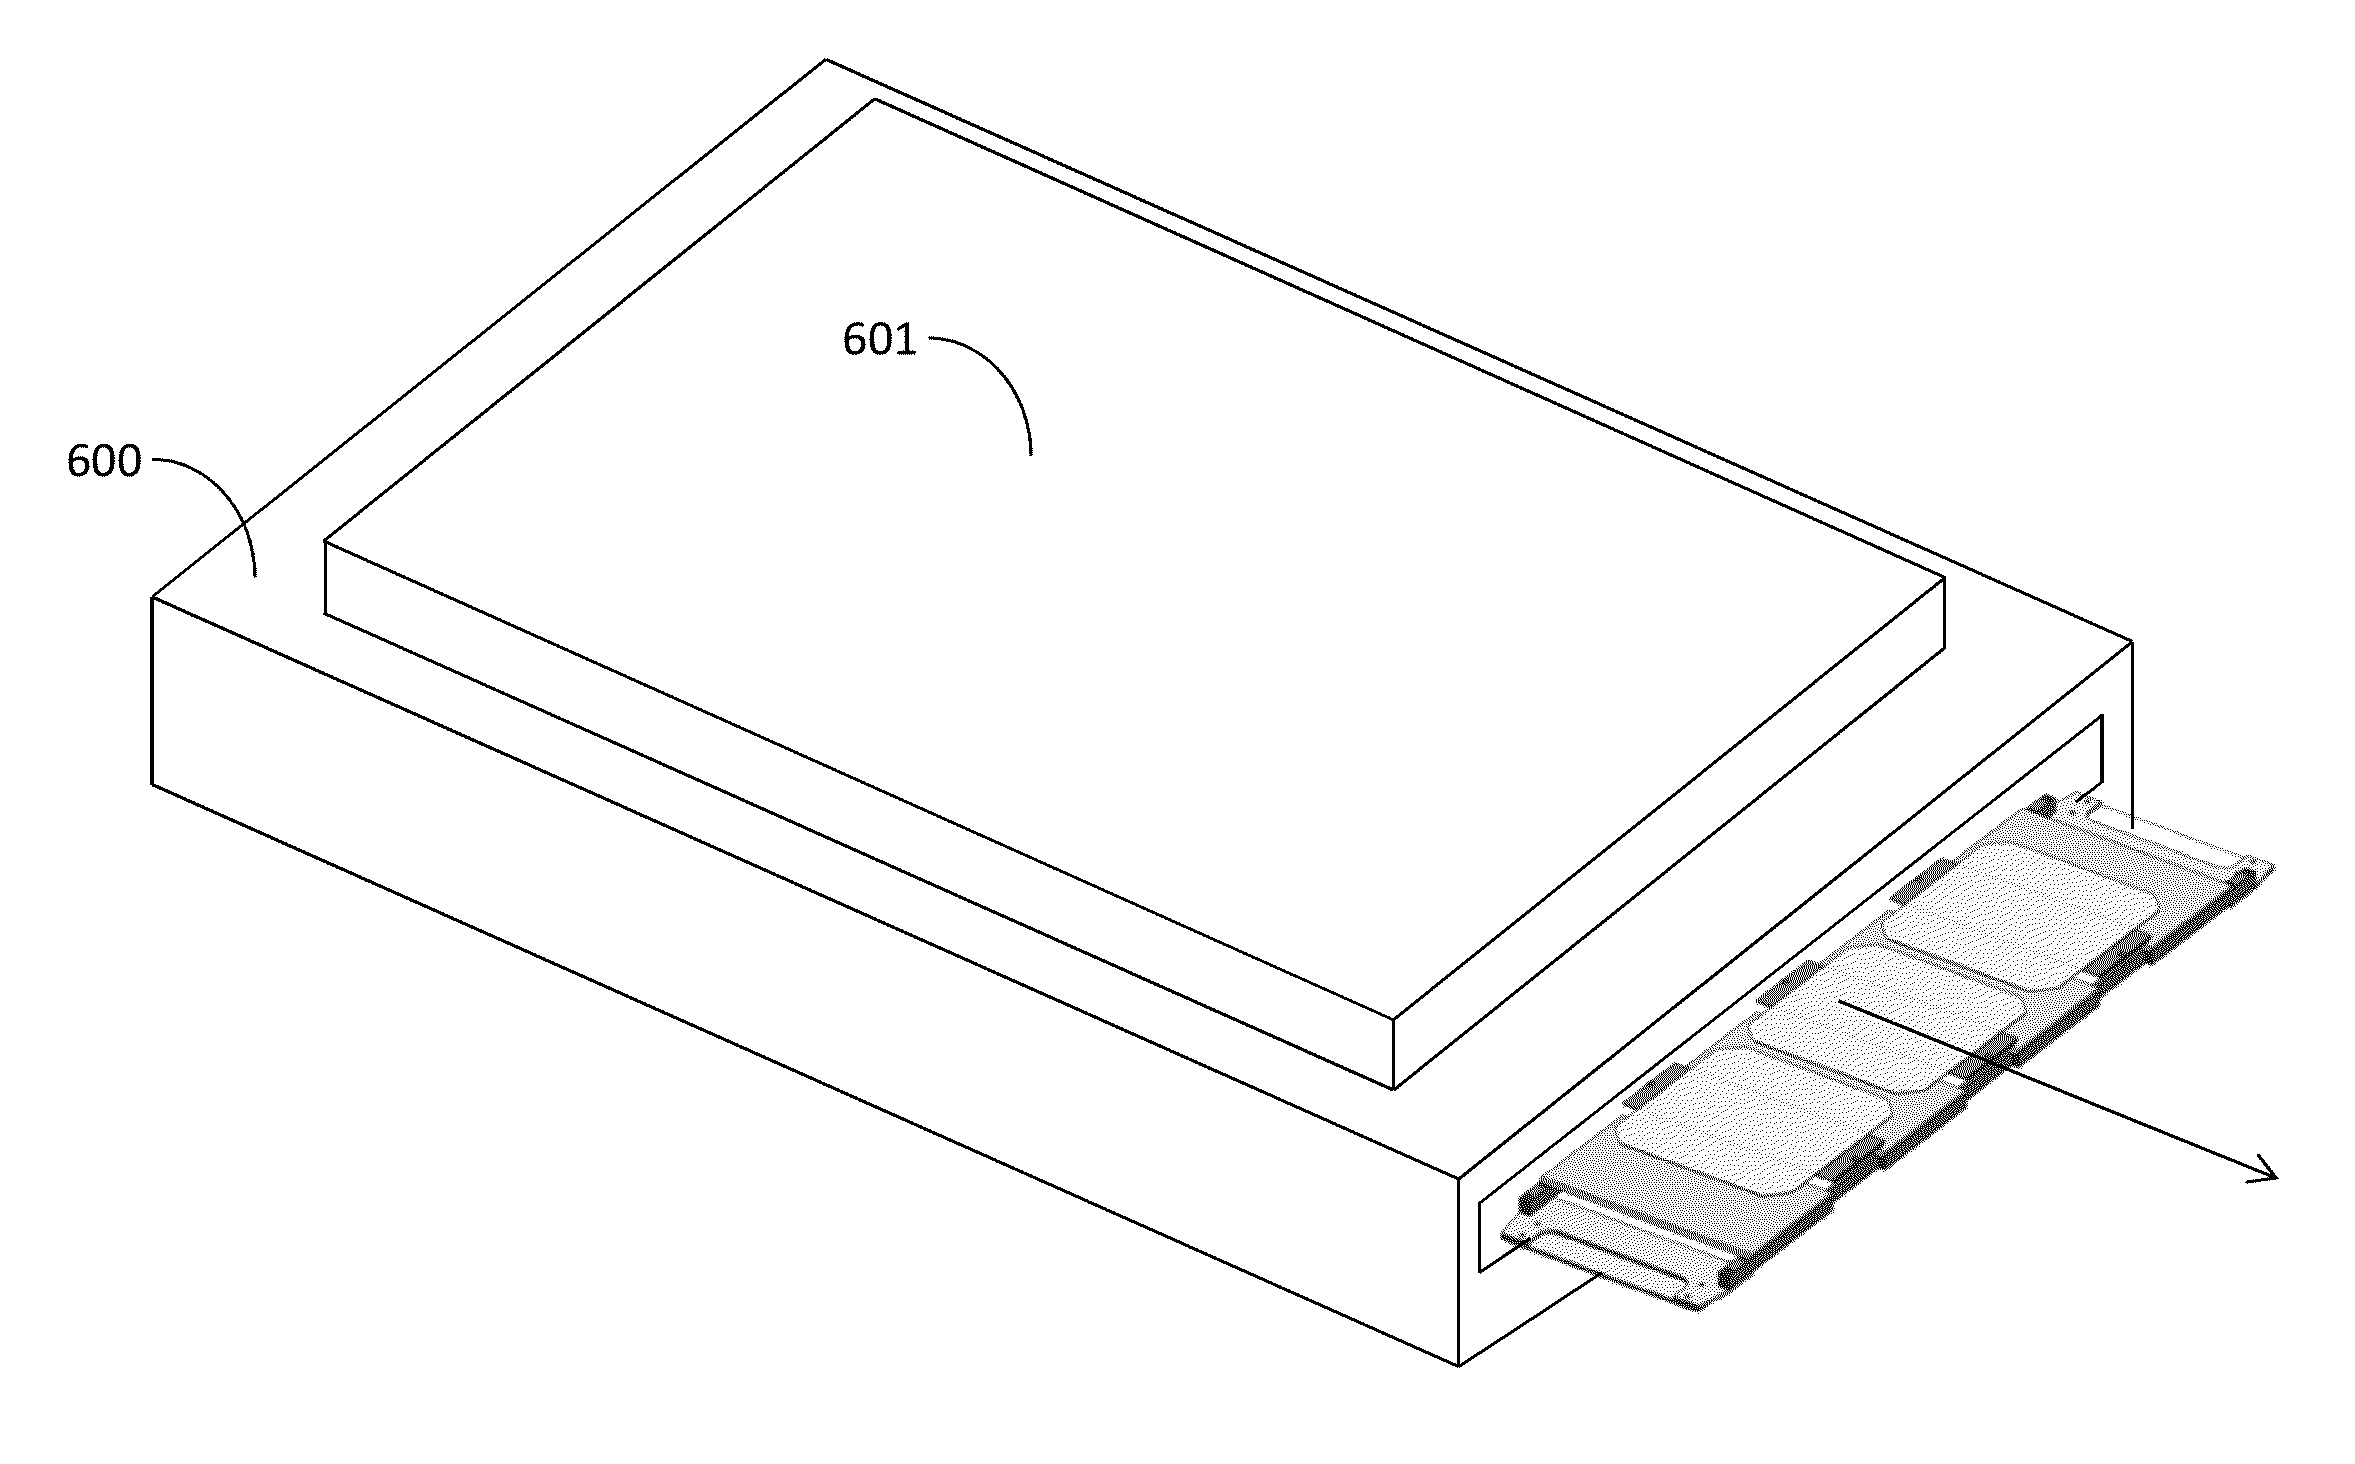 System and method for bi-facial processing of substrates